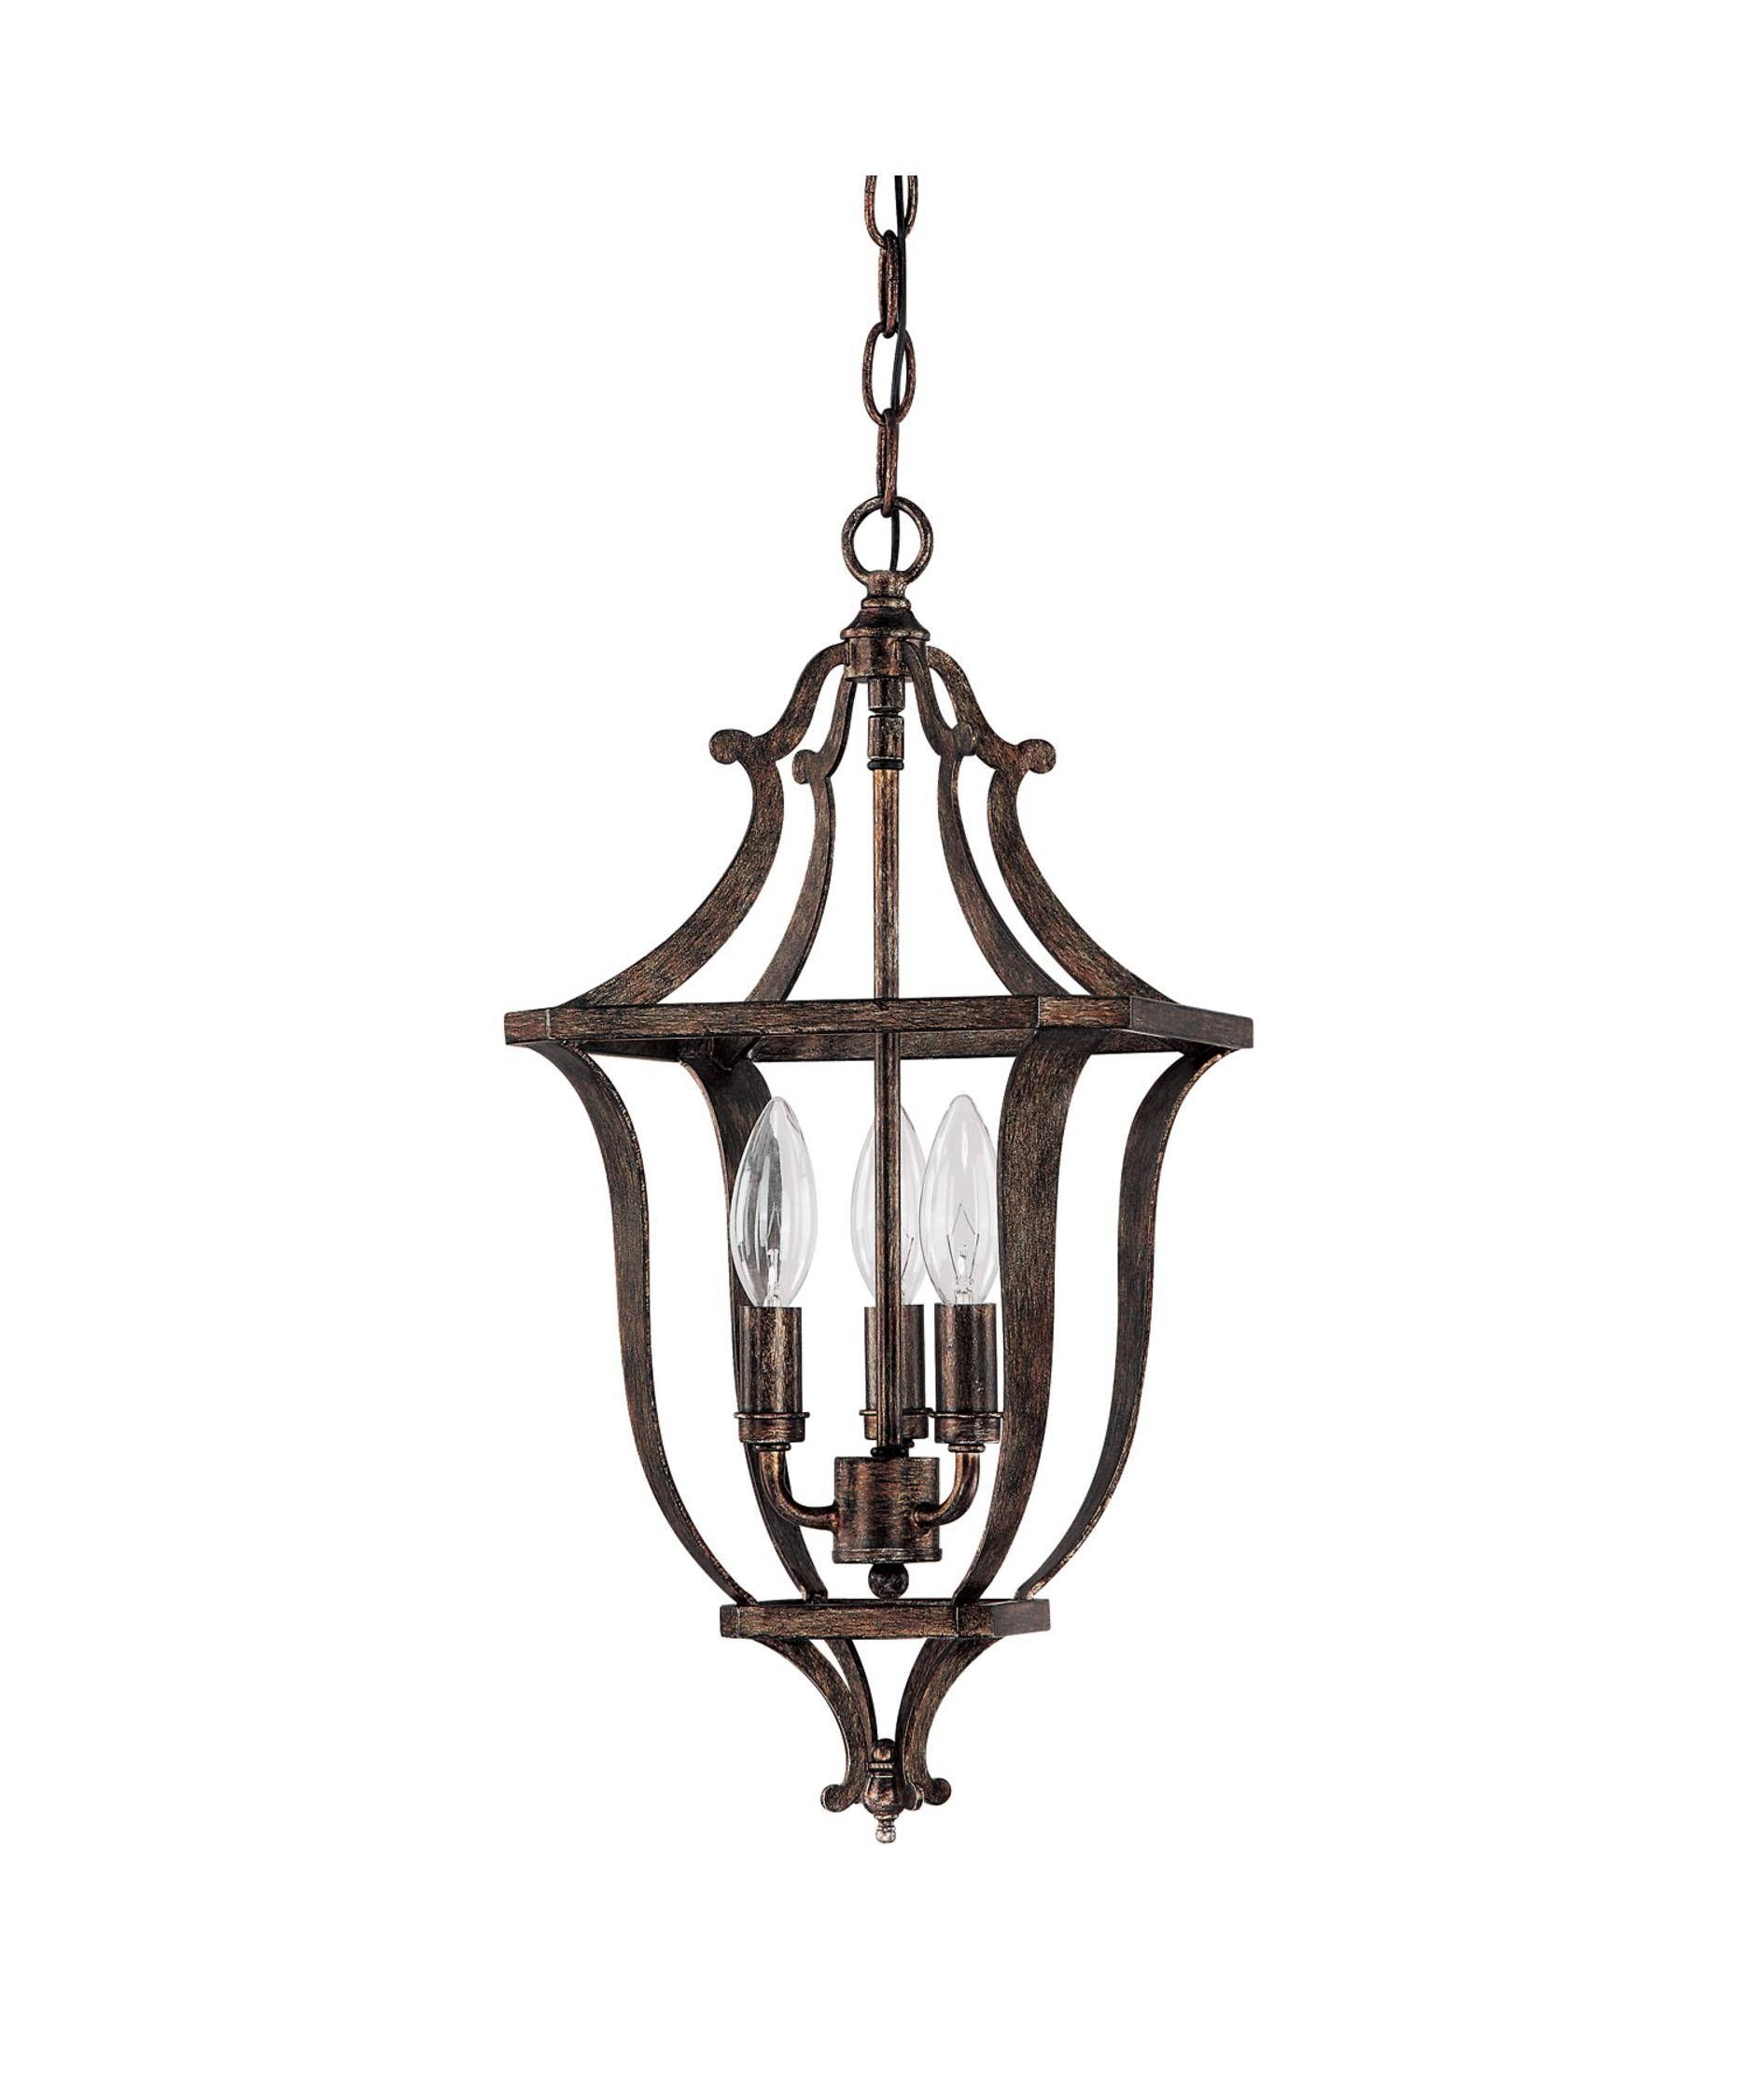 Wonderful Foyer Pendant Lighting With House Decorating Plan Foyer In Old World Pendant Lighting (View 4 of 15)